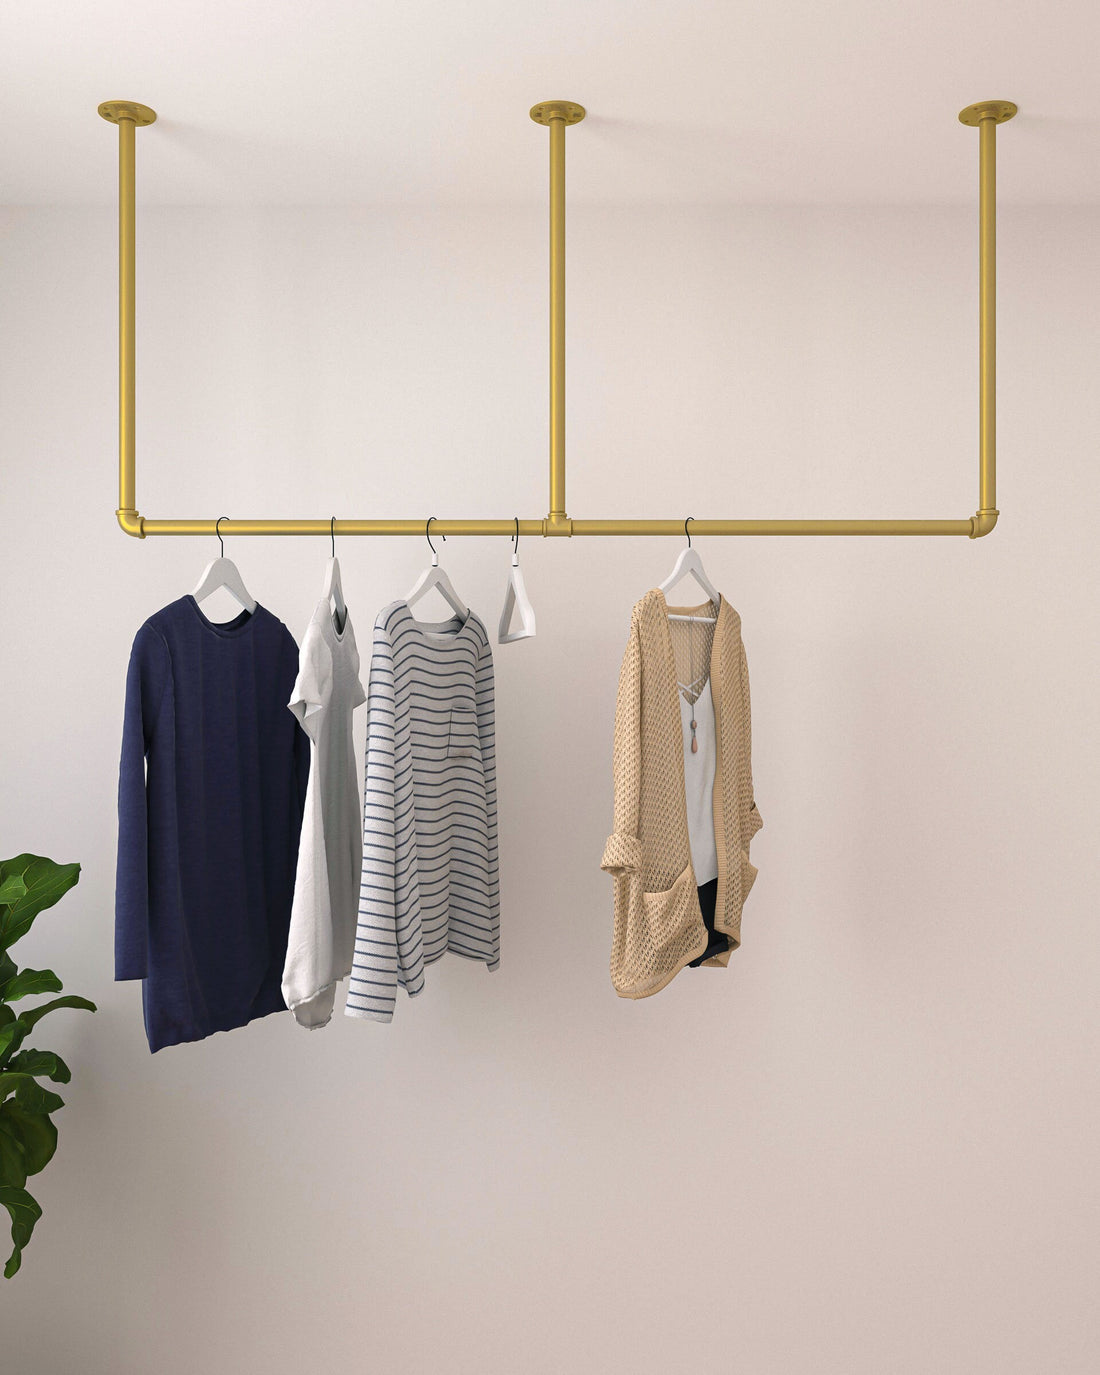 Bem Heavy Duty Minimalistic Clothes Rack, a ceiling-mounted shop display garment rail, suitable for various retail settings.